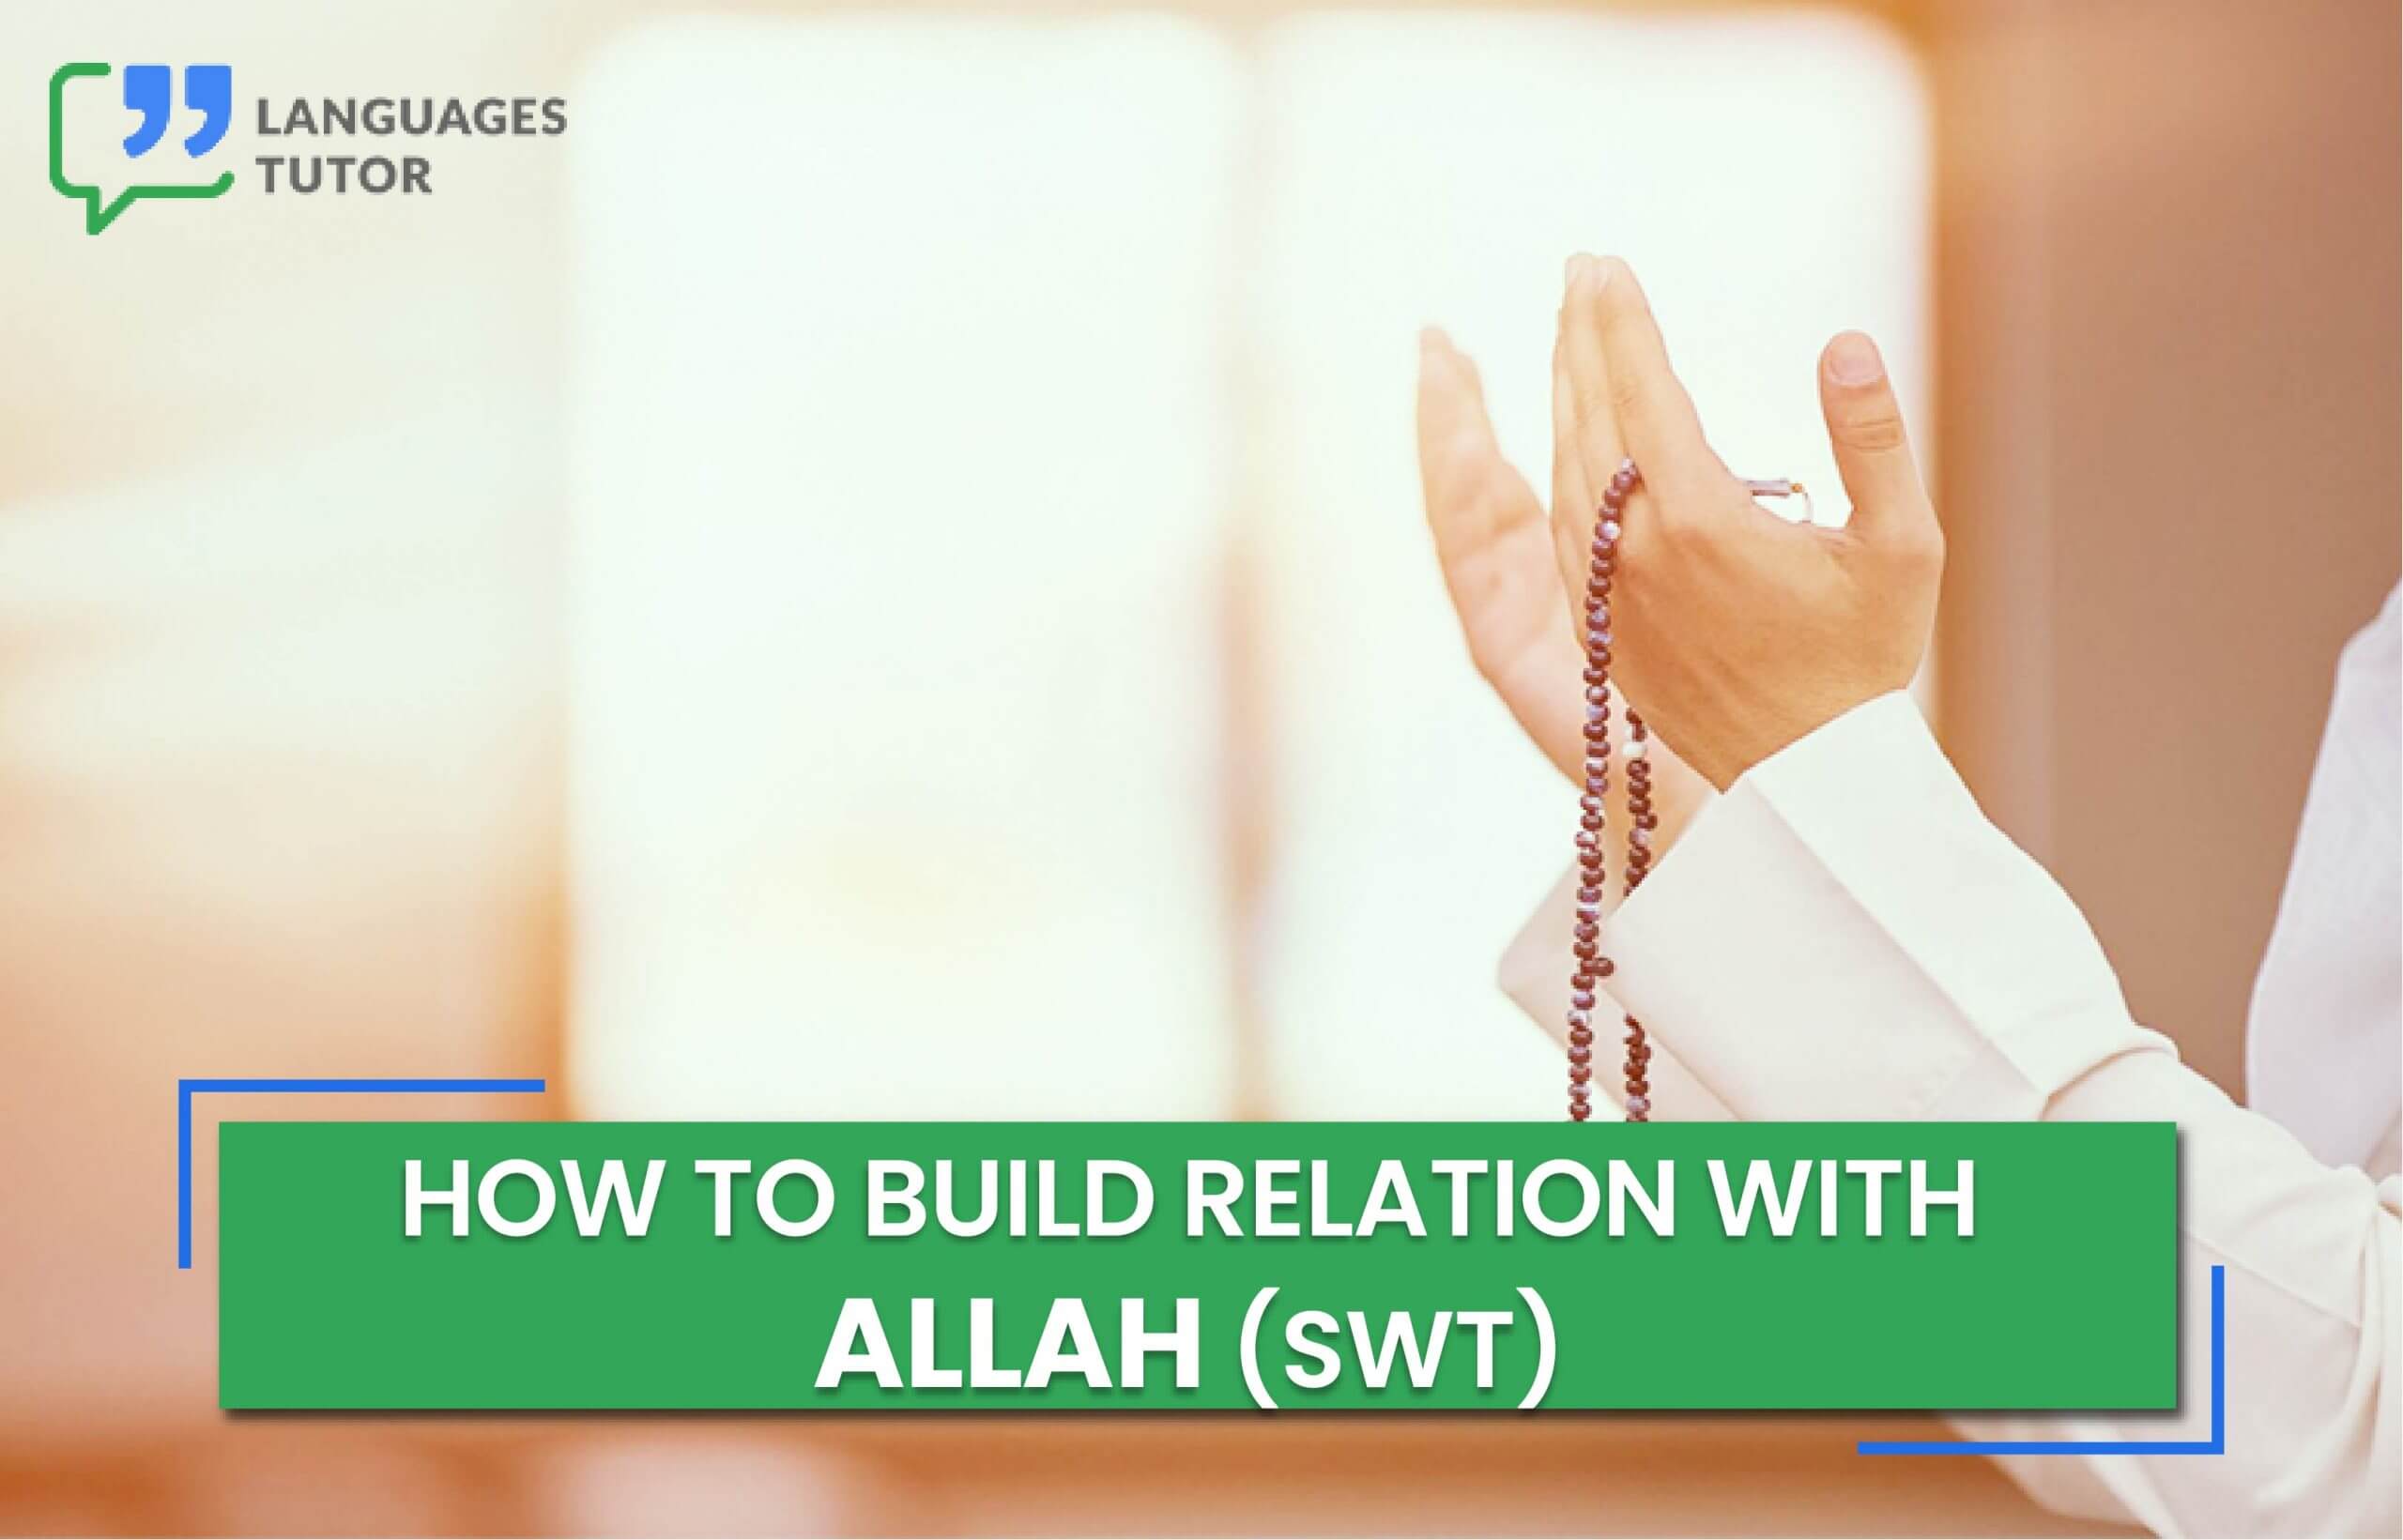 How to Build Relation with Allah (SWT).